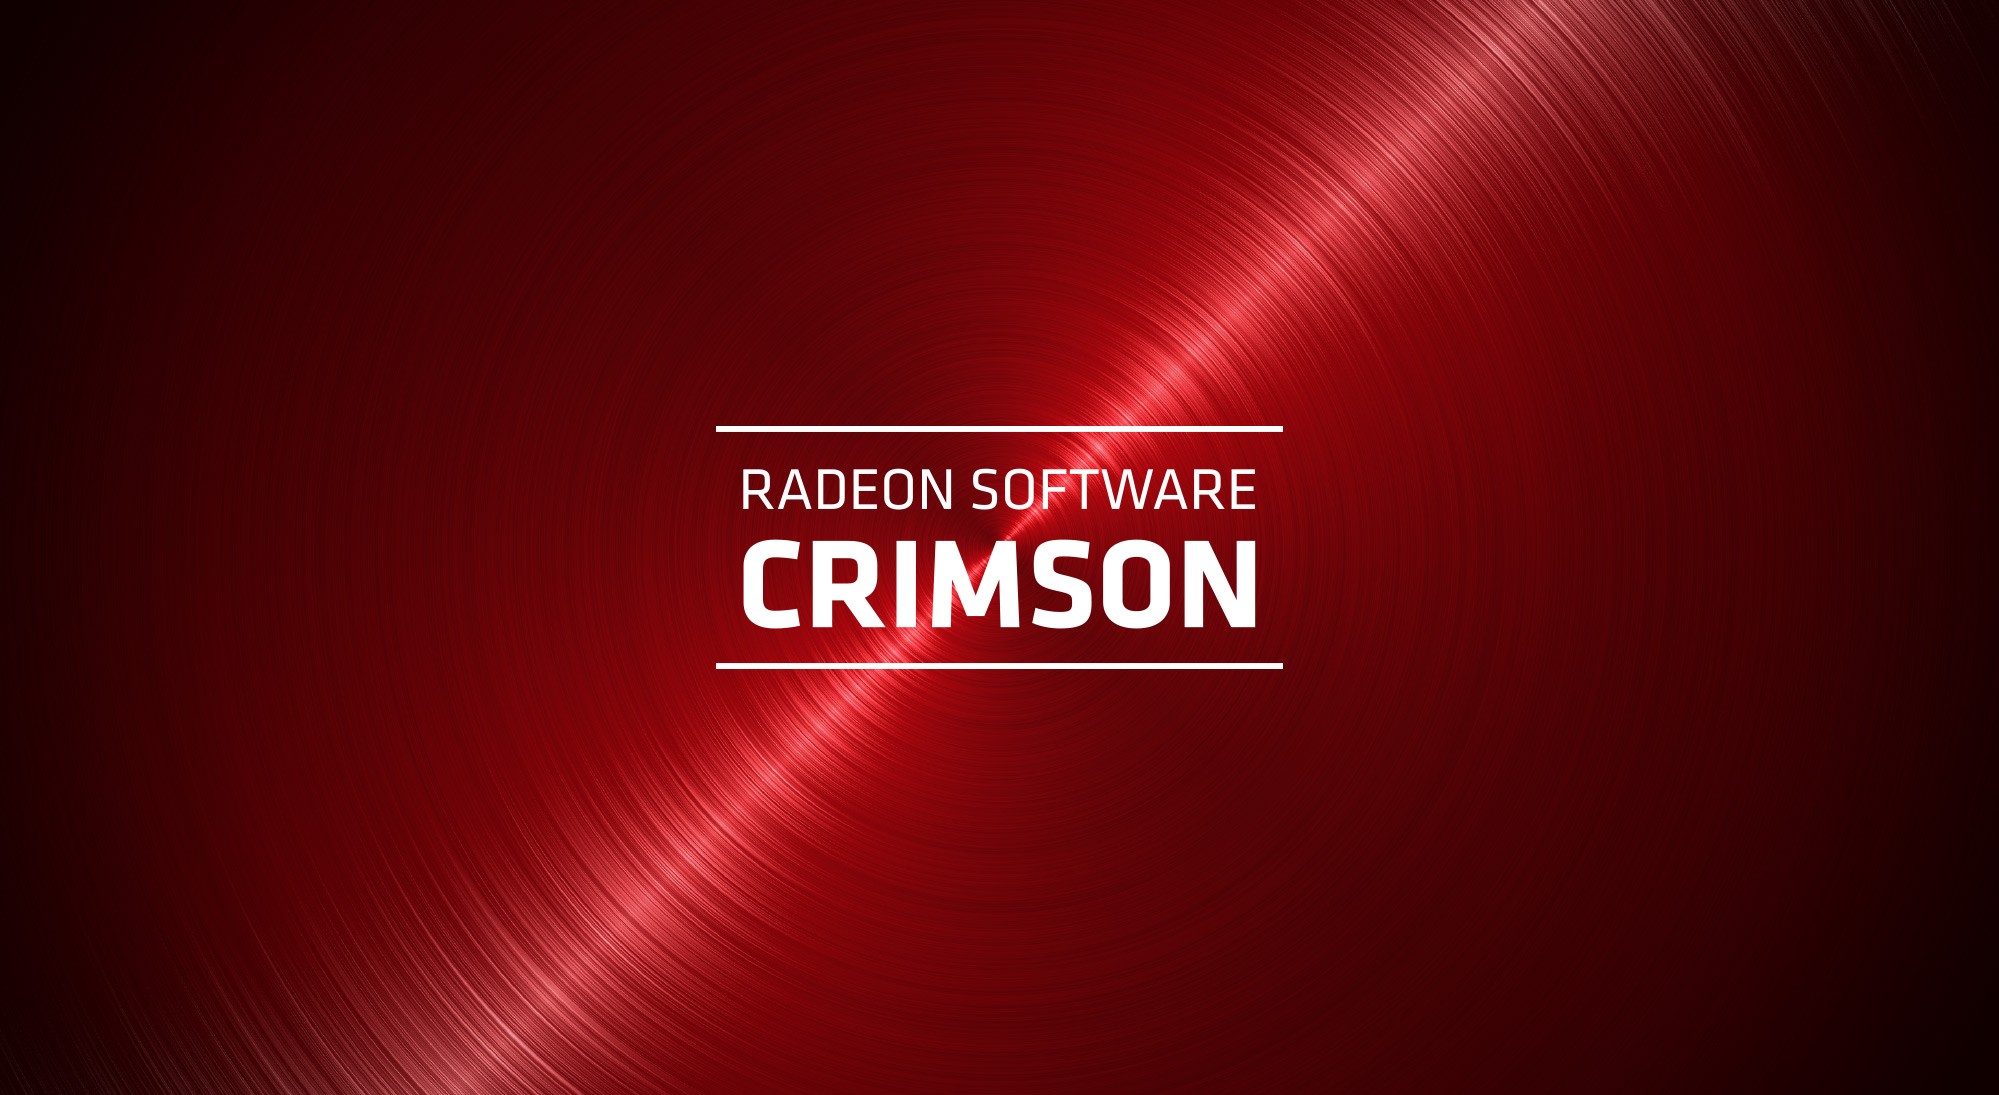 AMD Releases Radeon Crimson Edition 16.10.1 Hotfix Drivers, Supports Oculus Asynchronous Spacewarp